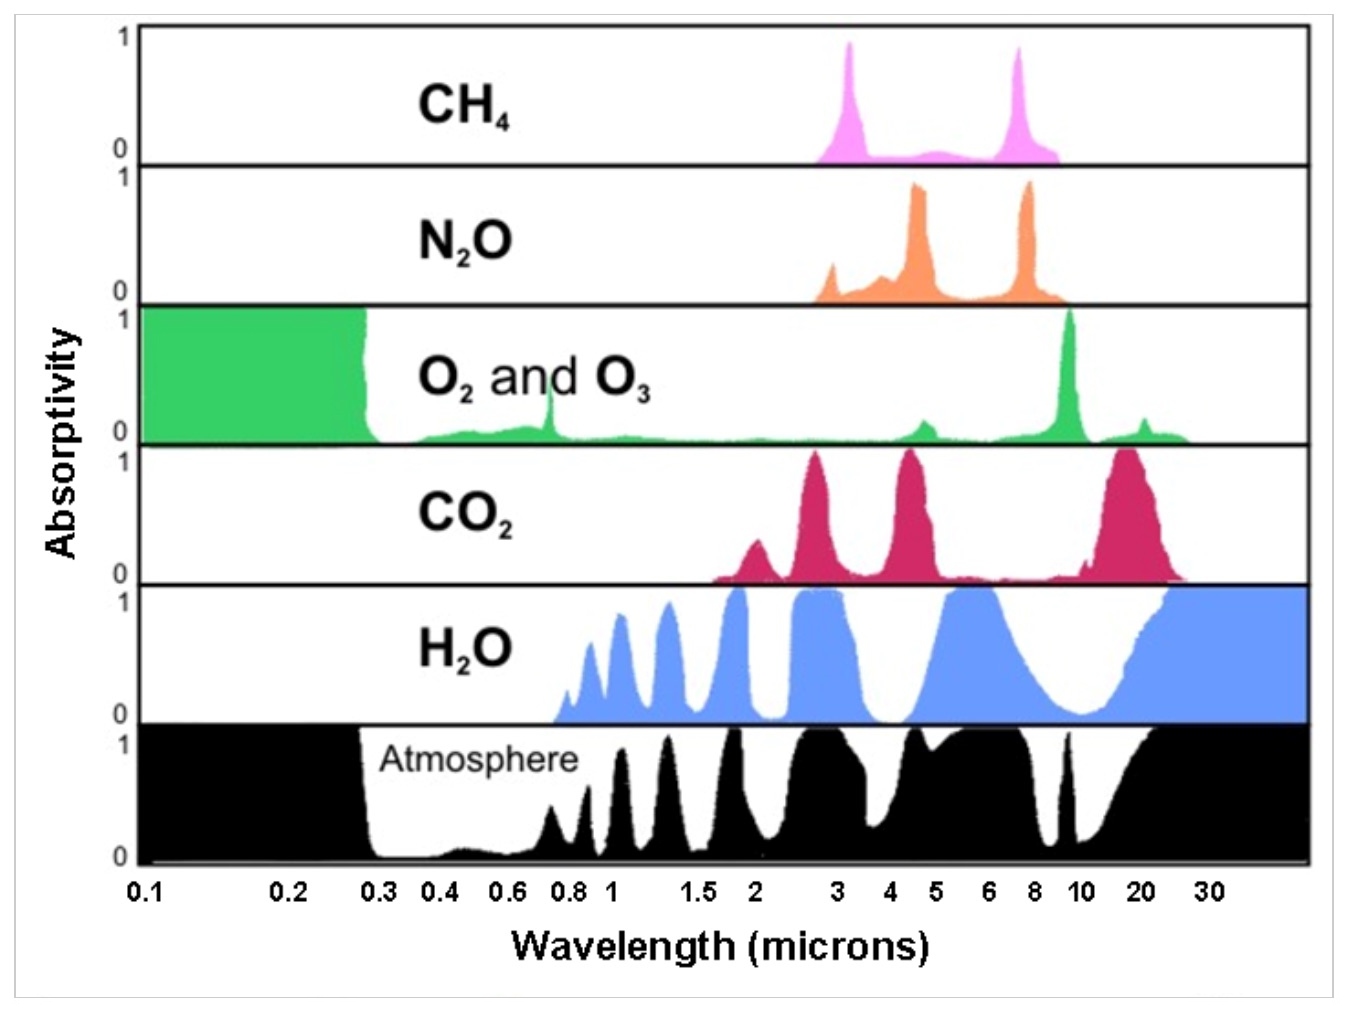 graphic showing absorbtion spectra of various gases in the atmosphere